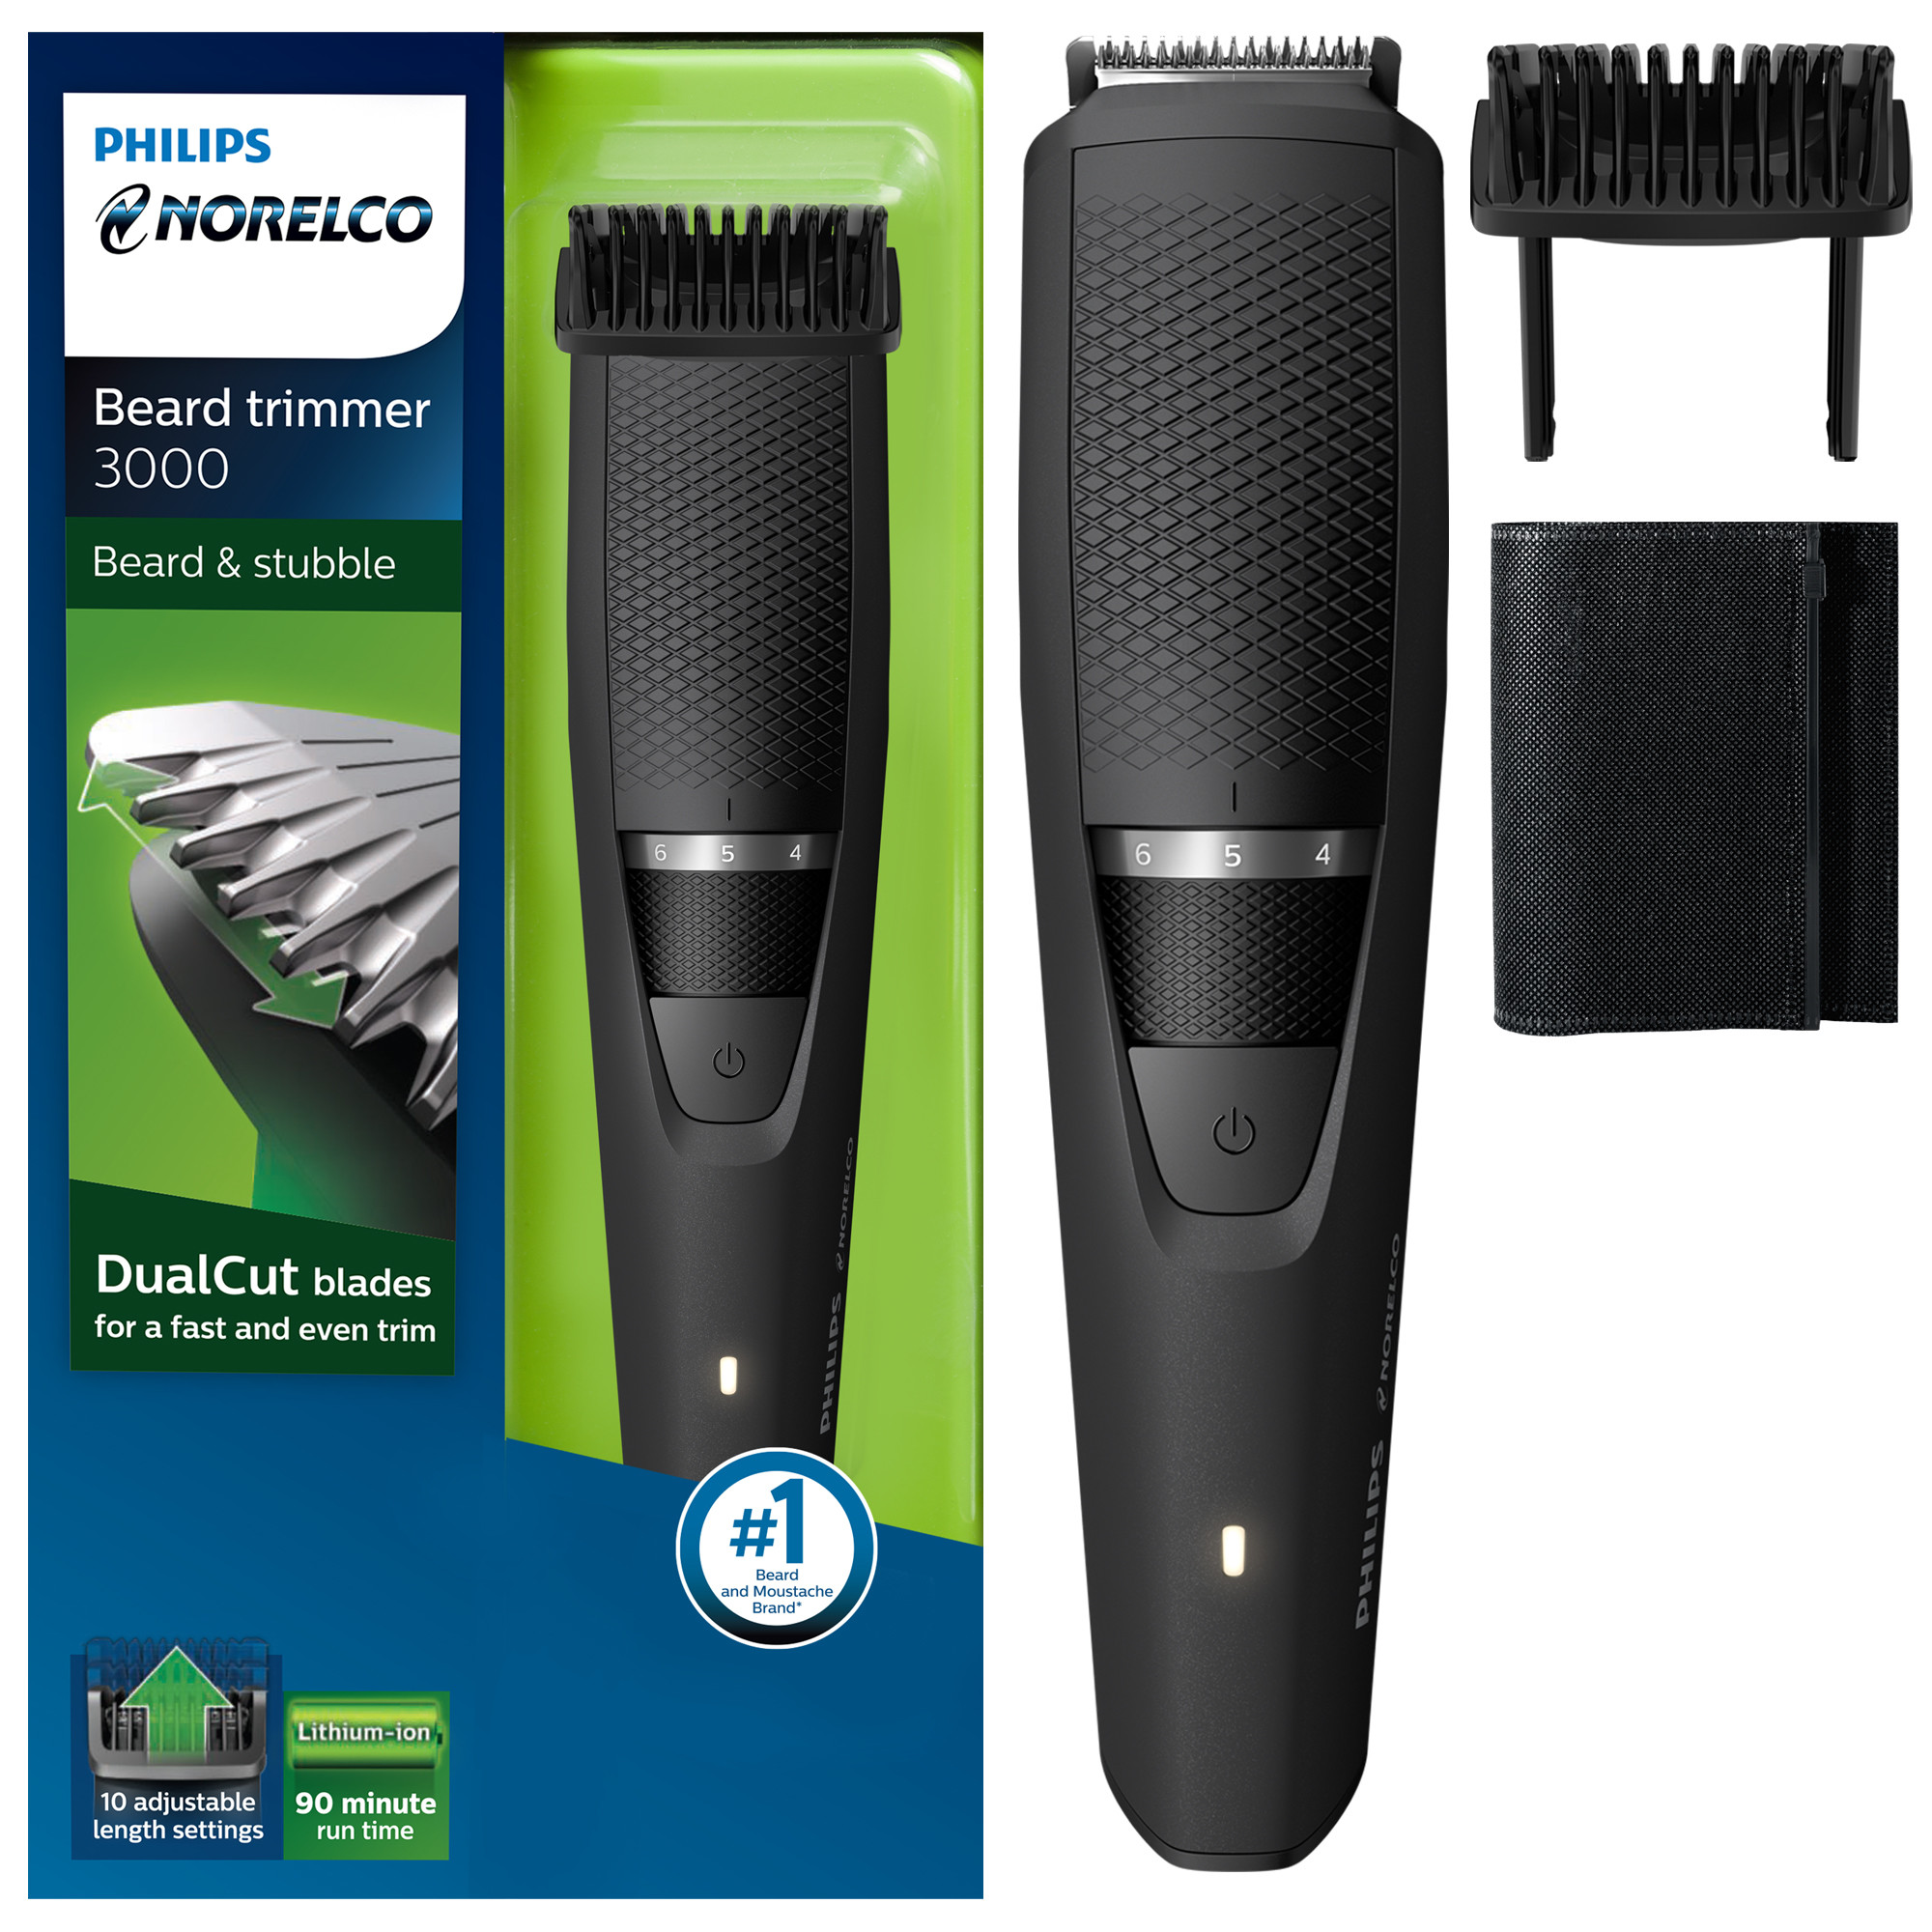 Philips Norelco Beard Trimmer and Hair Clipper - Cordless Grooming, Rechargeable, Adjustable Length, Beard Trimmer and Hair Clipper - No Blade Oil Needed - BT3210/41 - image 1 of 22